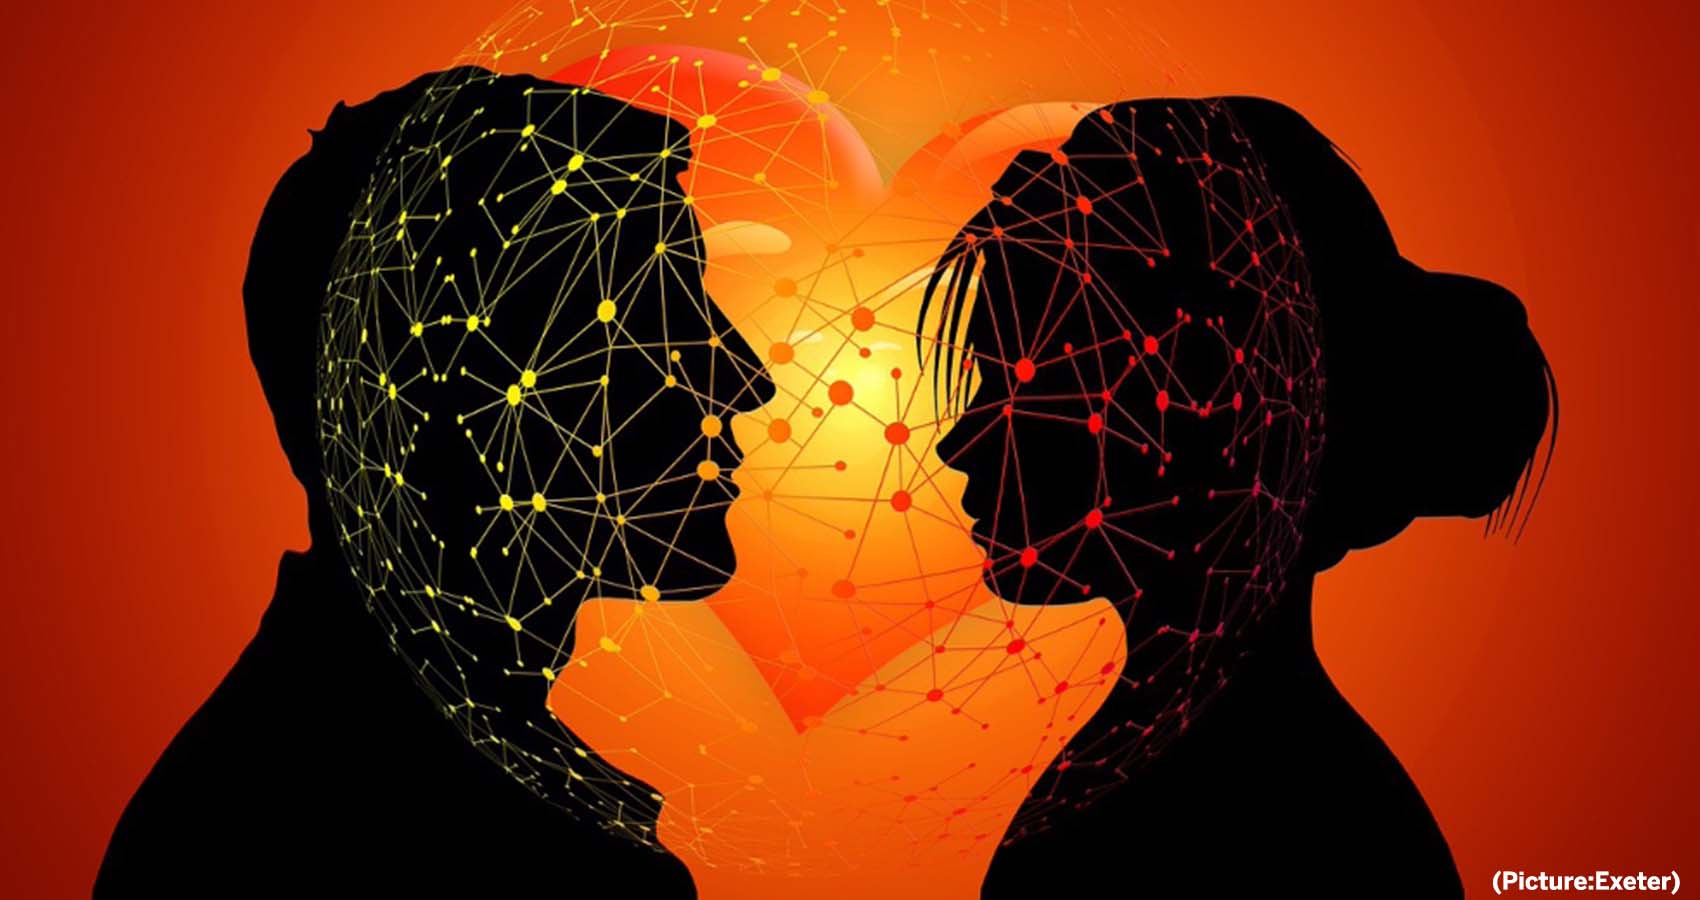 Is Hybrid Dating The New Norm?